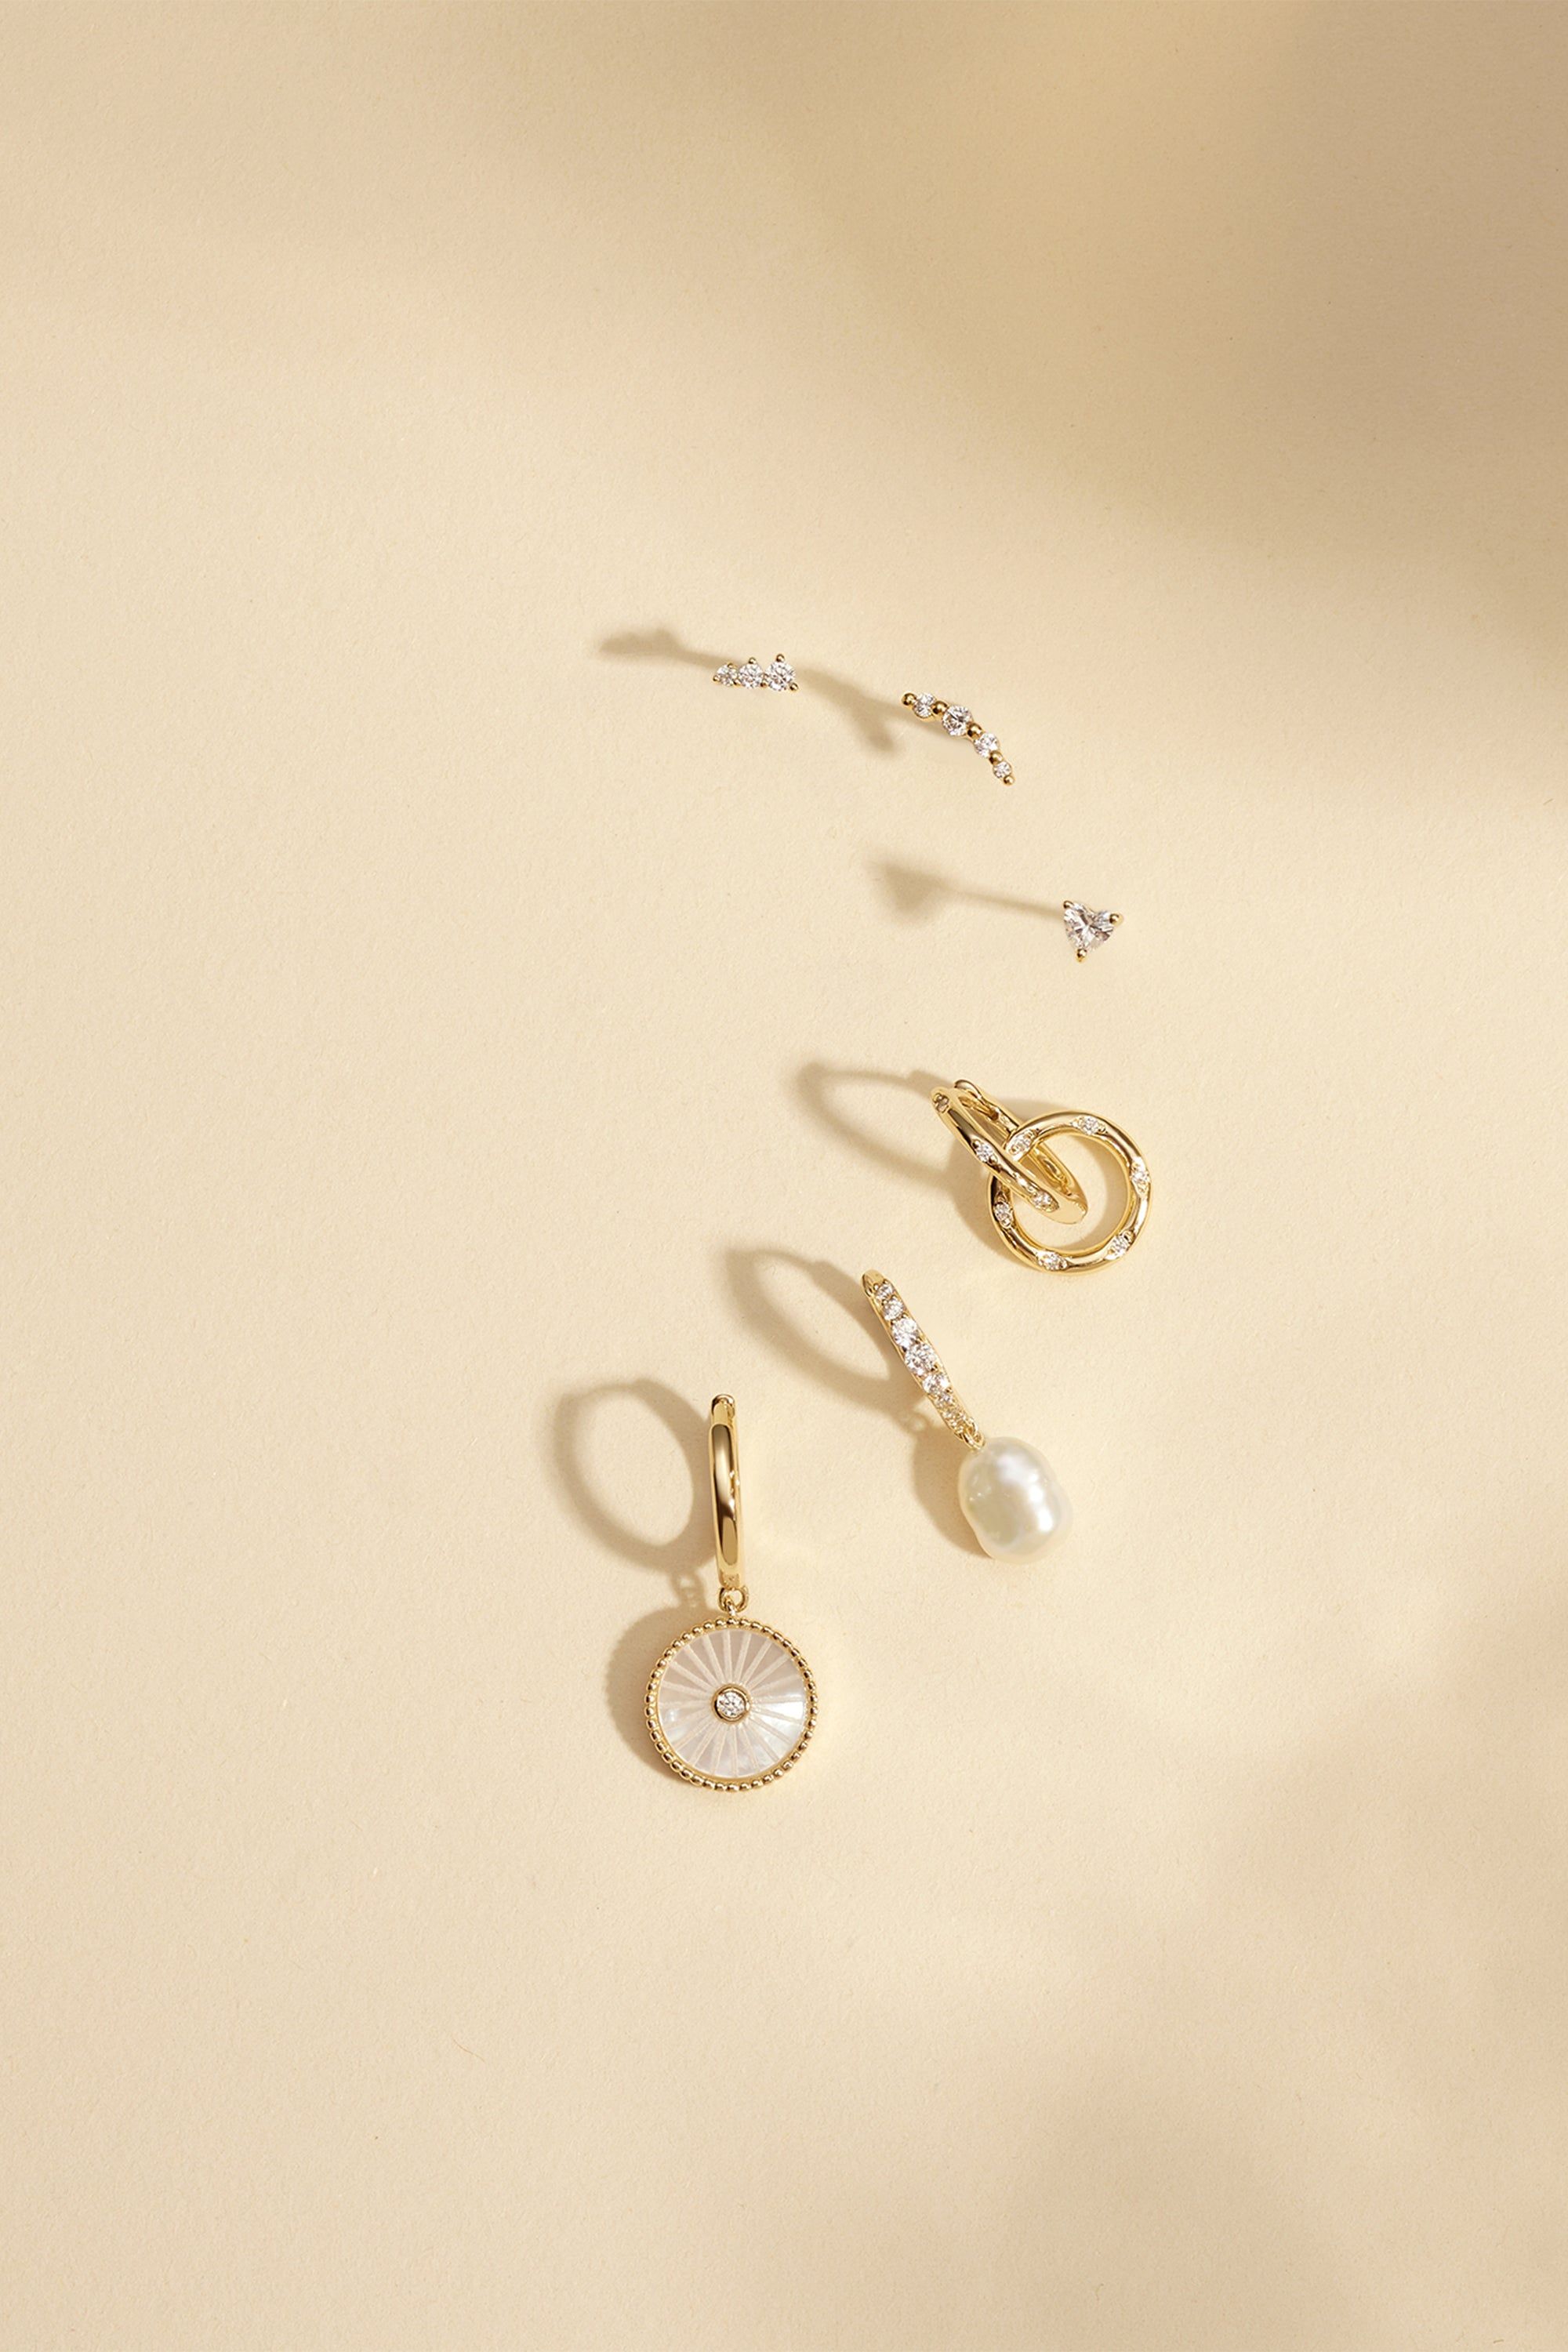 three pairs of earrings on a beige surface